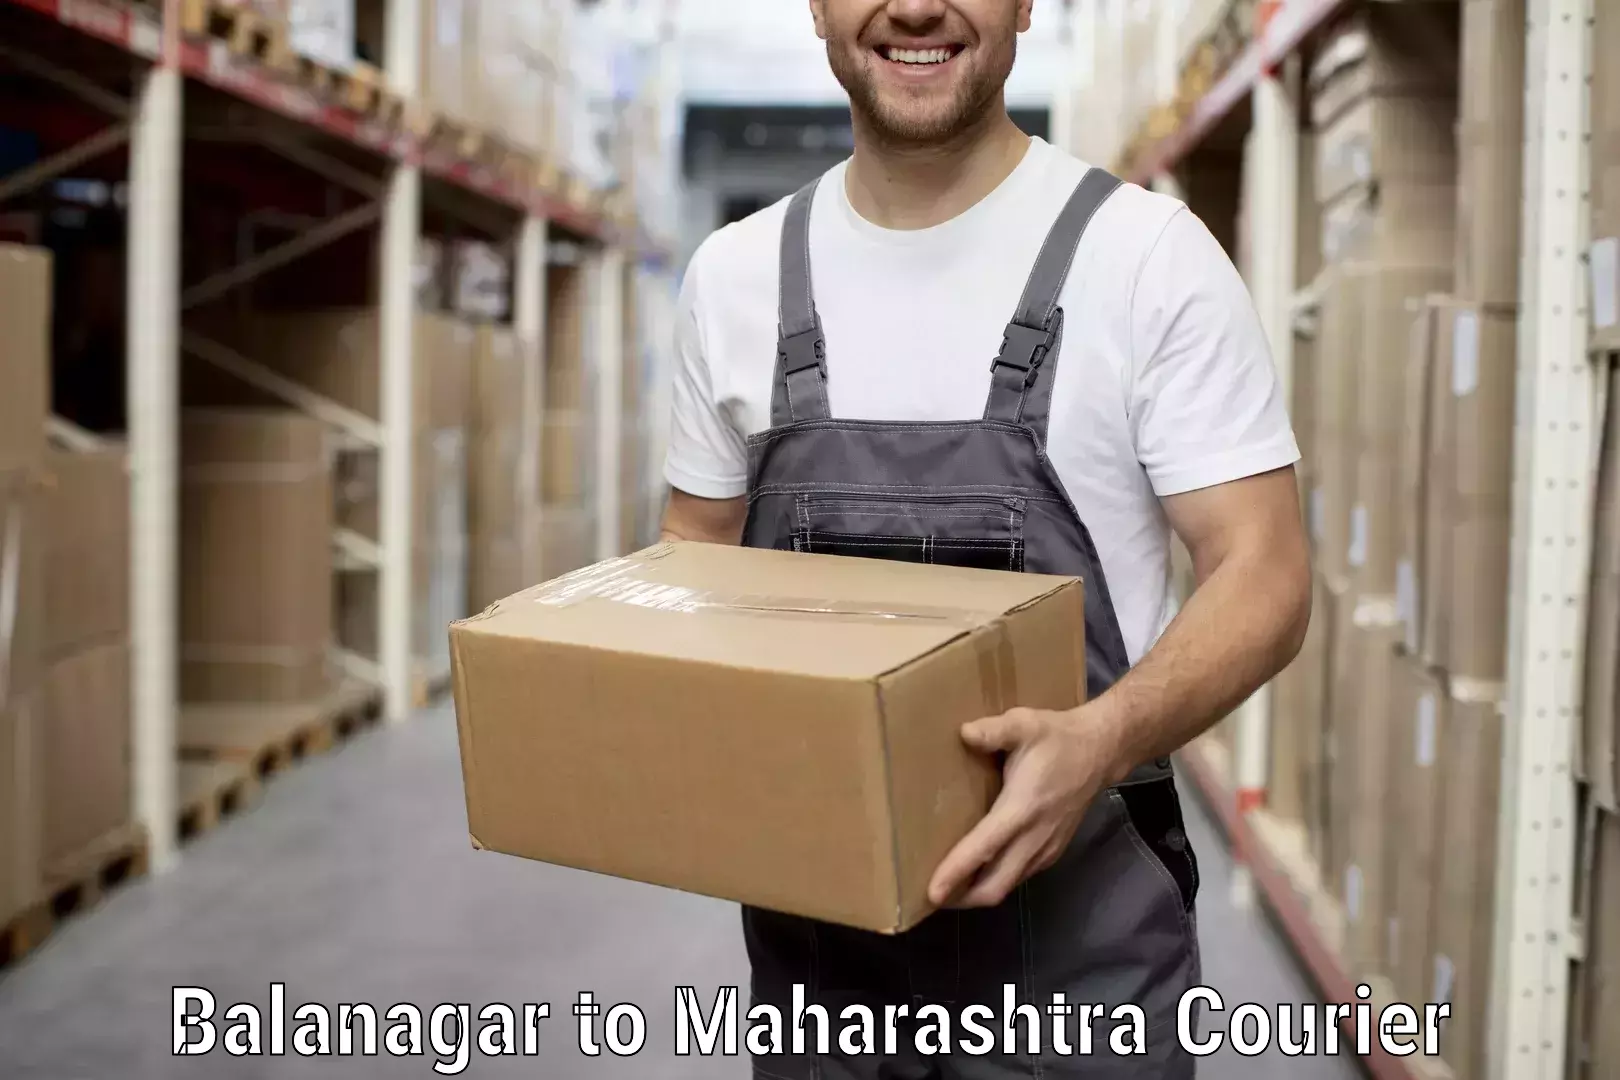 Professional movers in Balanagar to Shirpur